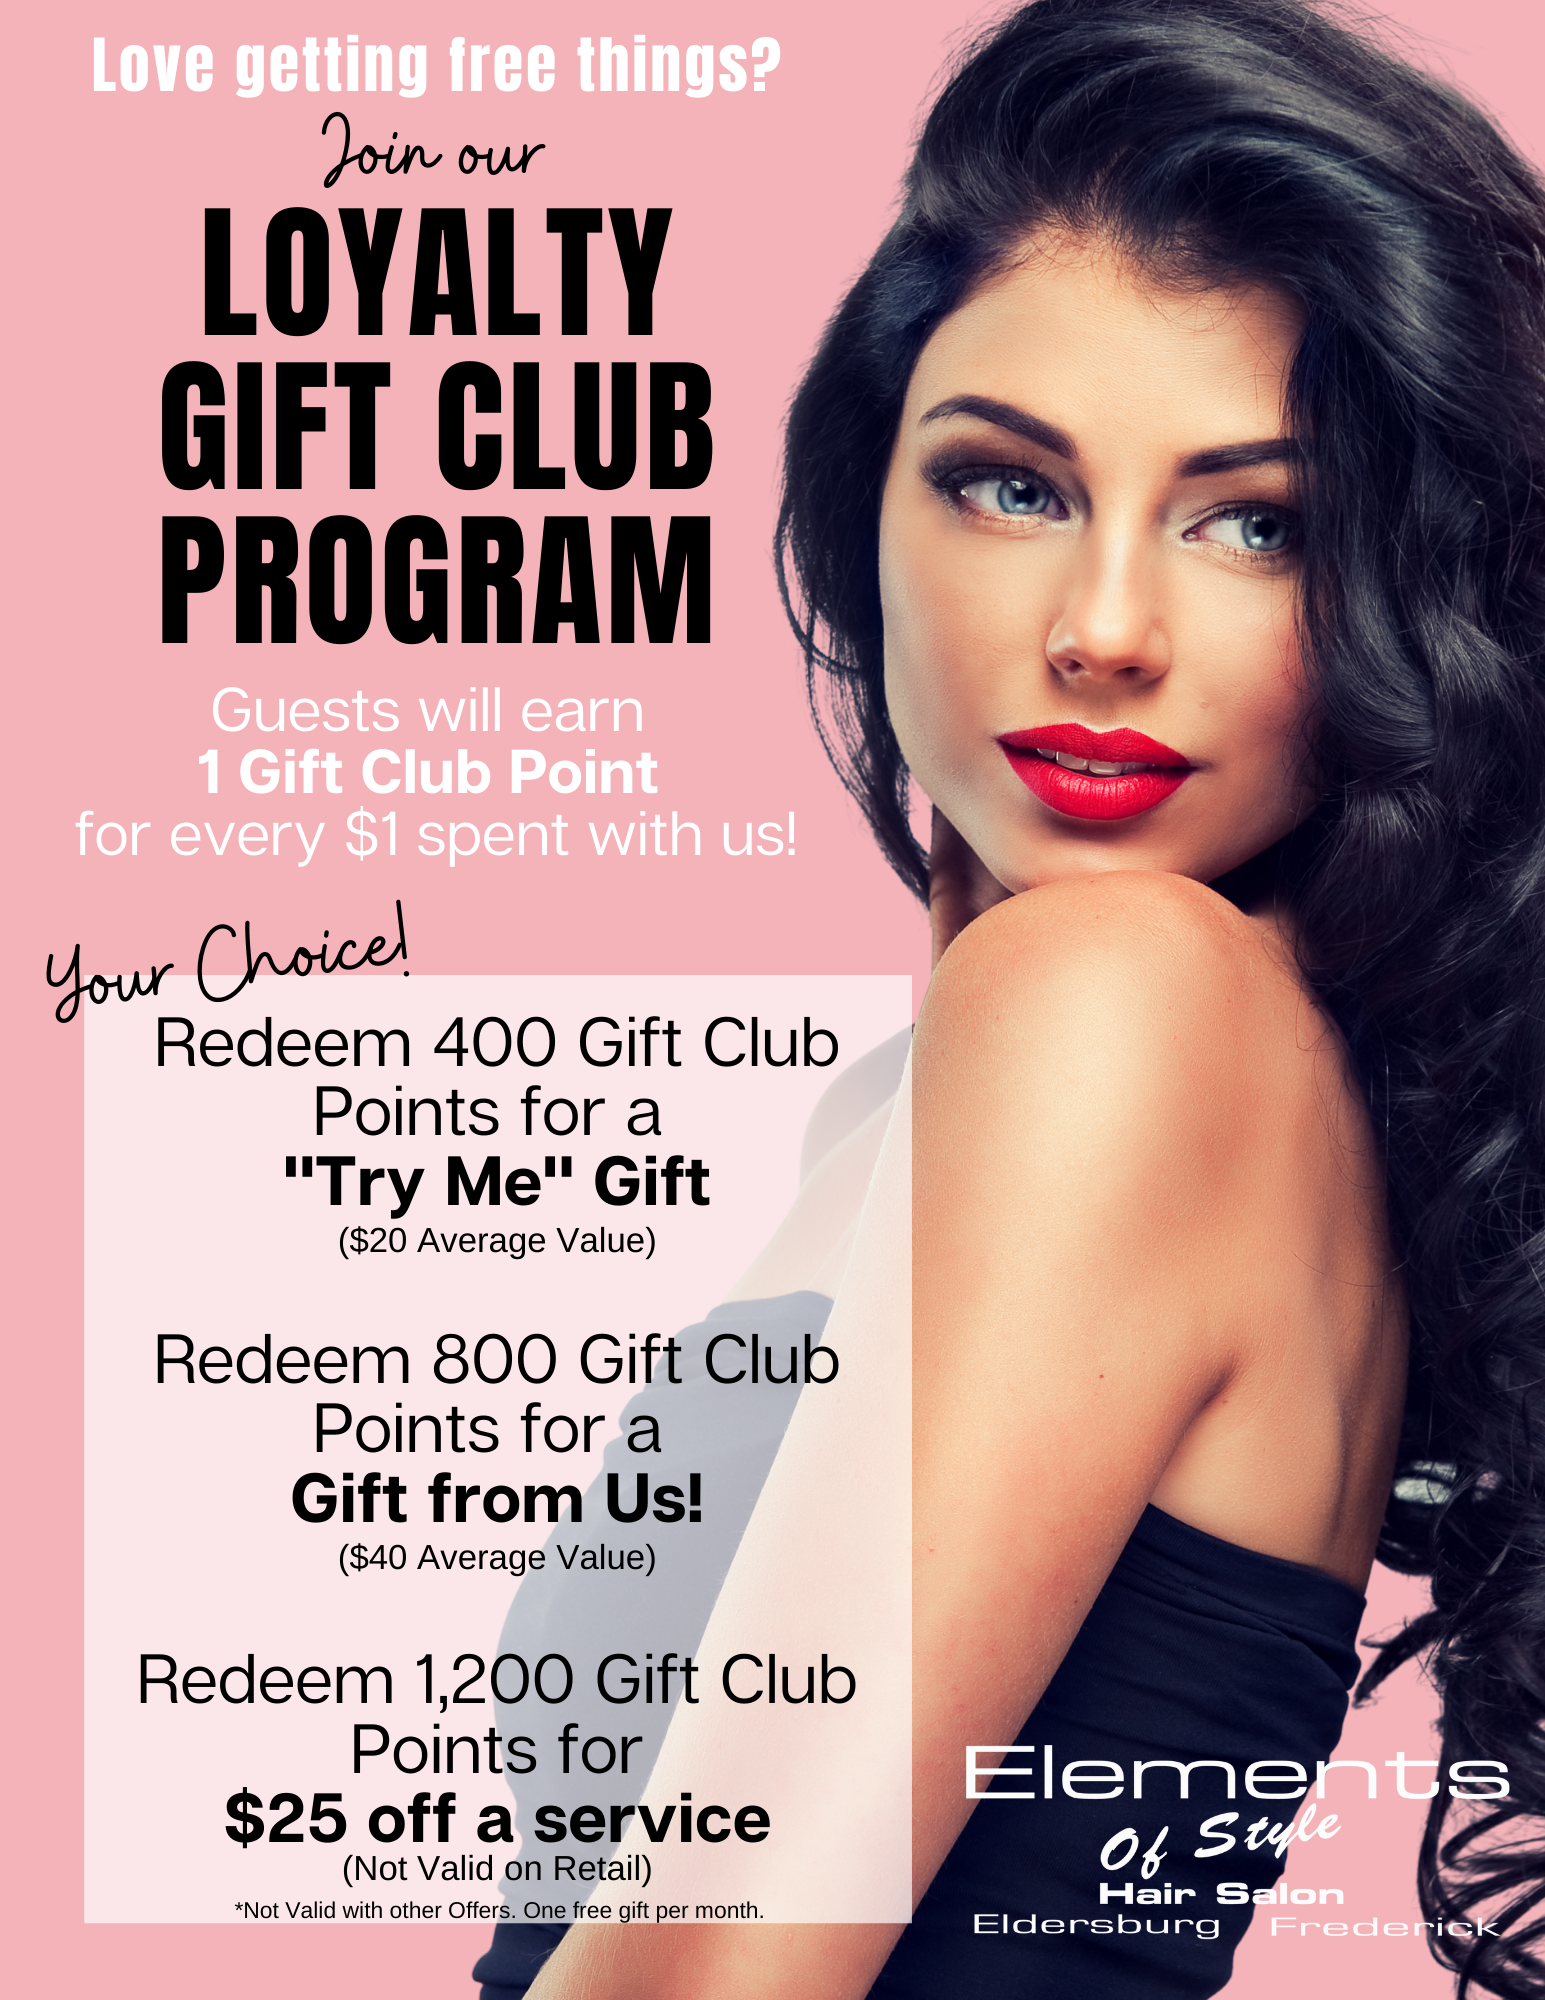 Loyalty Gift Club - Elements of Style Salon